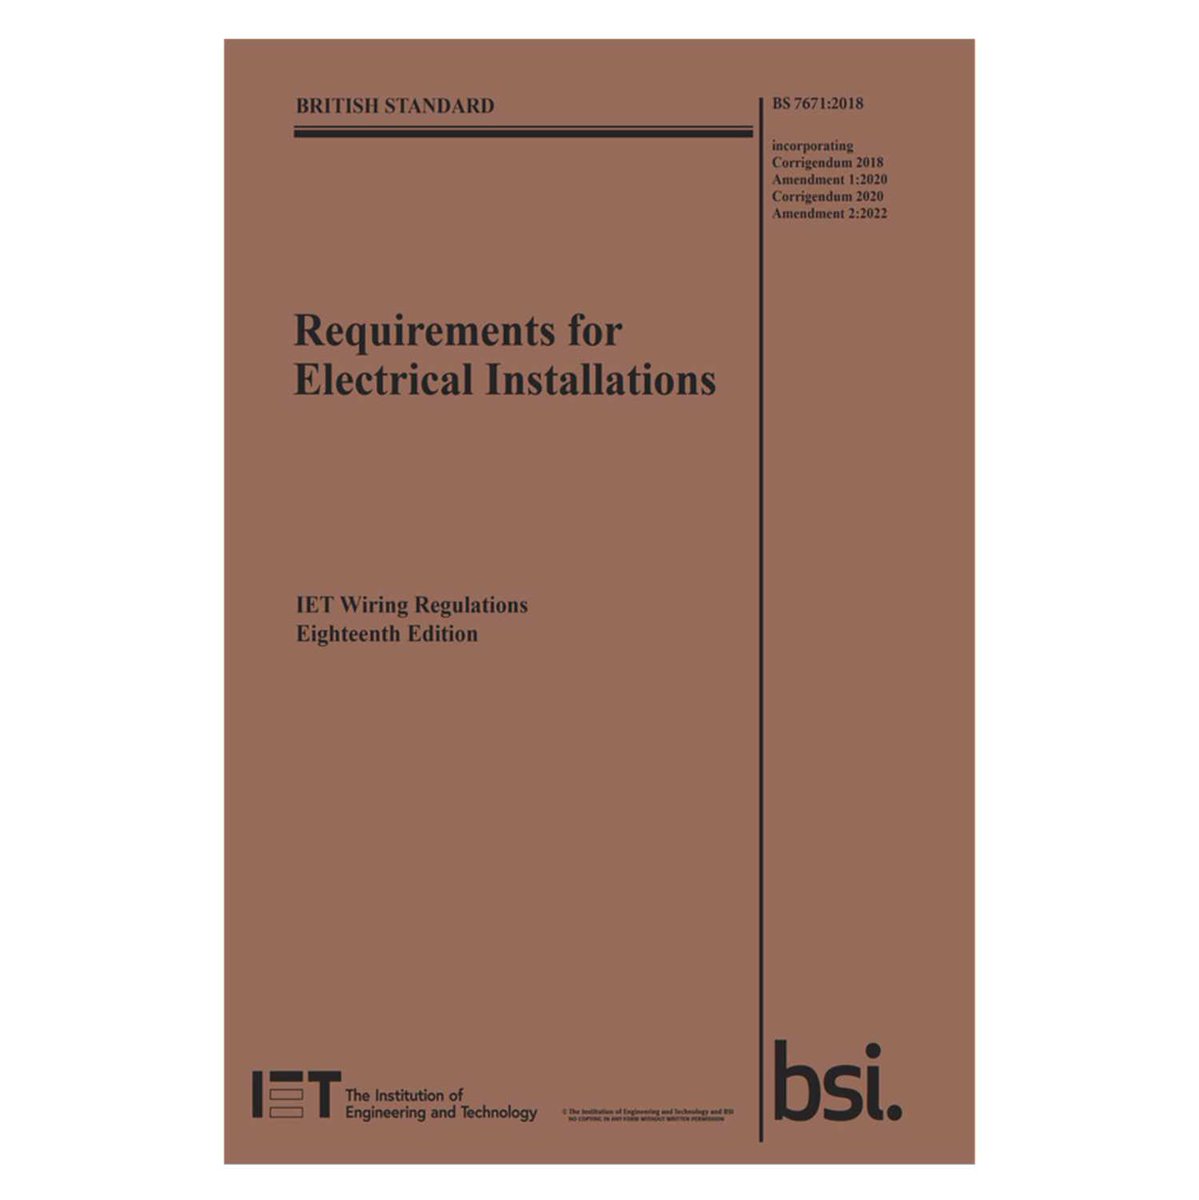 Don't forget to download the BS7671:2018 A2 corrigendum from the IET website. Changes in Part 4,5 and 7 will take immediate effect. 

#iet #cityandguilds #EAL #lclawards #bs7671 #18theditionwiringregulations #18thedition #trydantraining #corrigendum